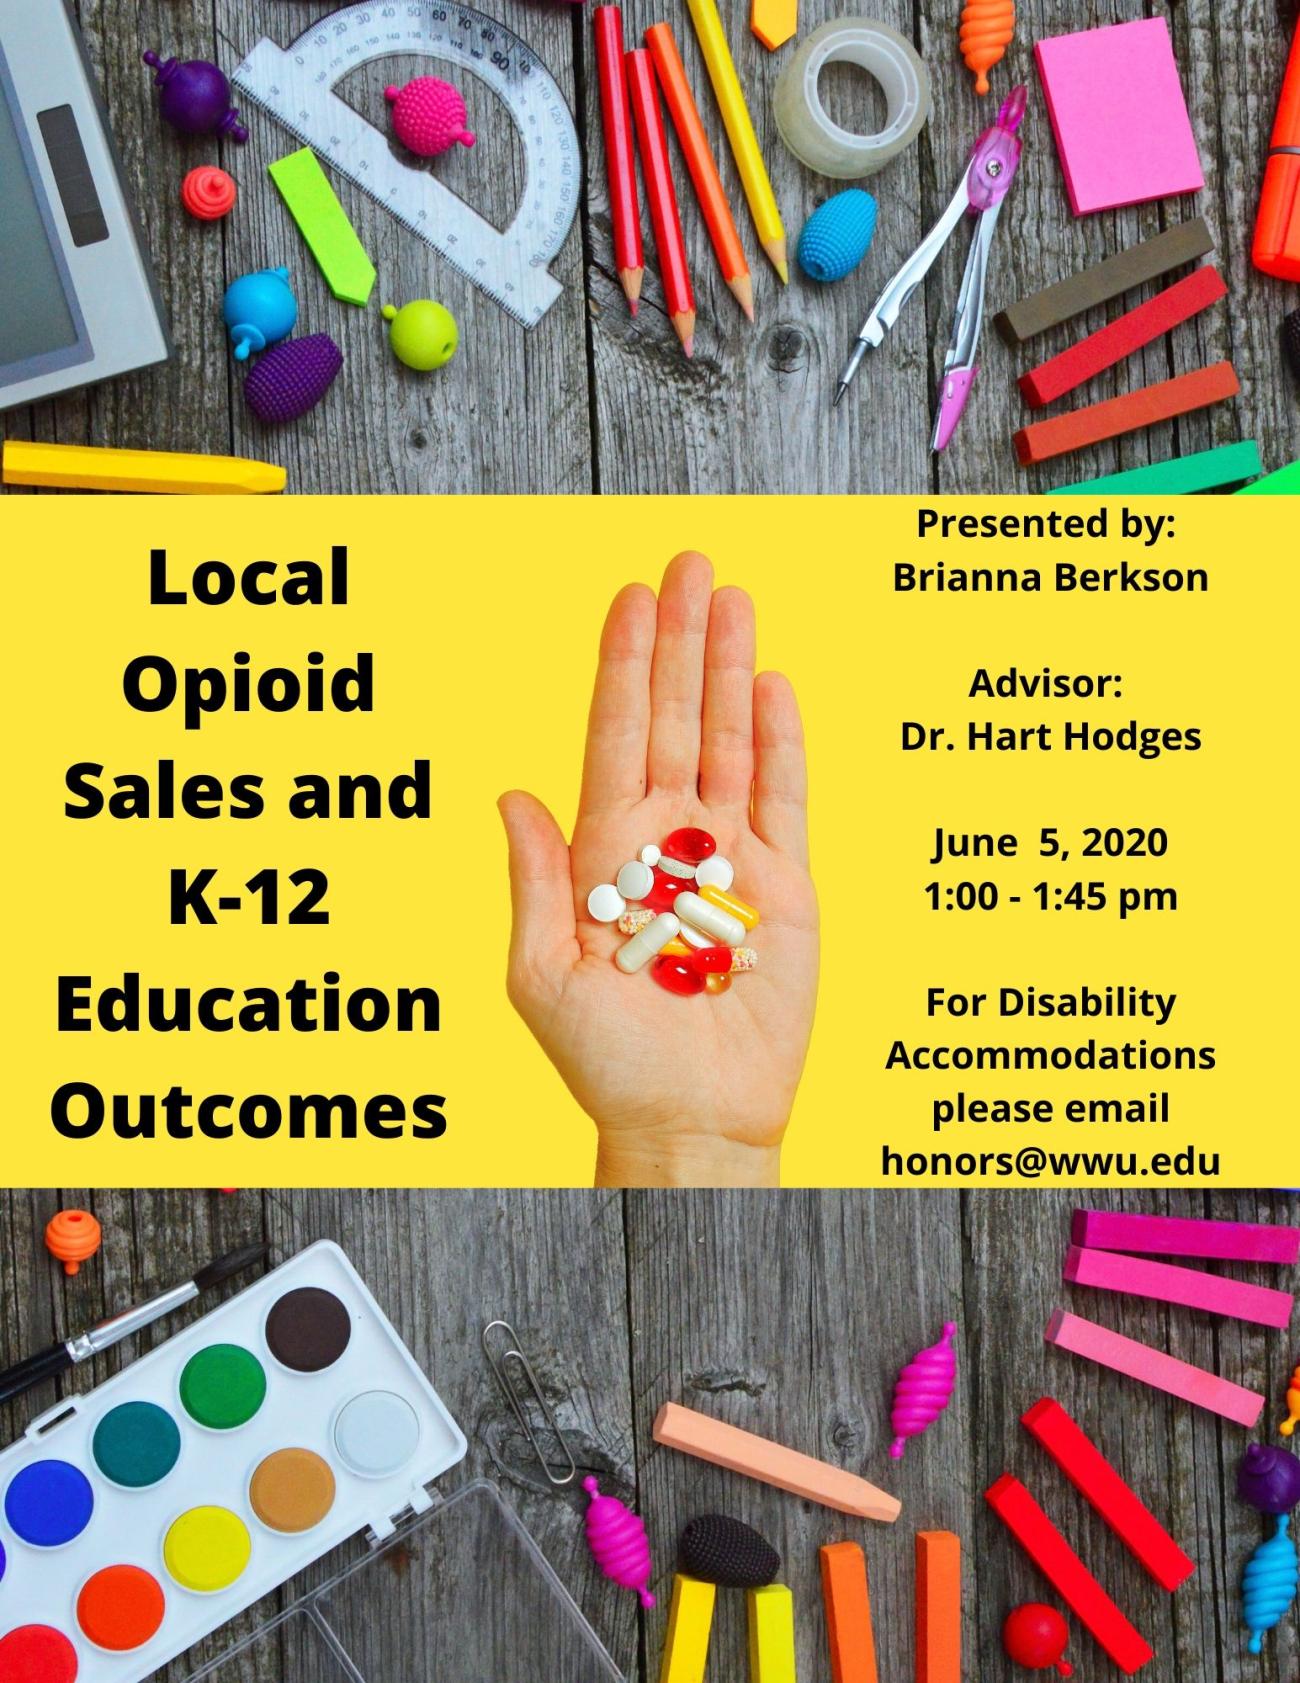 Image: A table with school supplies and a hand holding pills.  Text reads: “Local Opioid Sales and K-12 Education Outcomes.  Presented by: Brianna Berkson.  Advisor: Dr. Hart Hodges.  June 5, 2020.  1:00-1:45 pm.  For Disability Accommodations please email honors@wwu.edu”